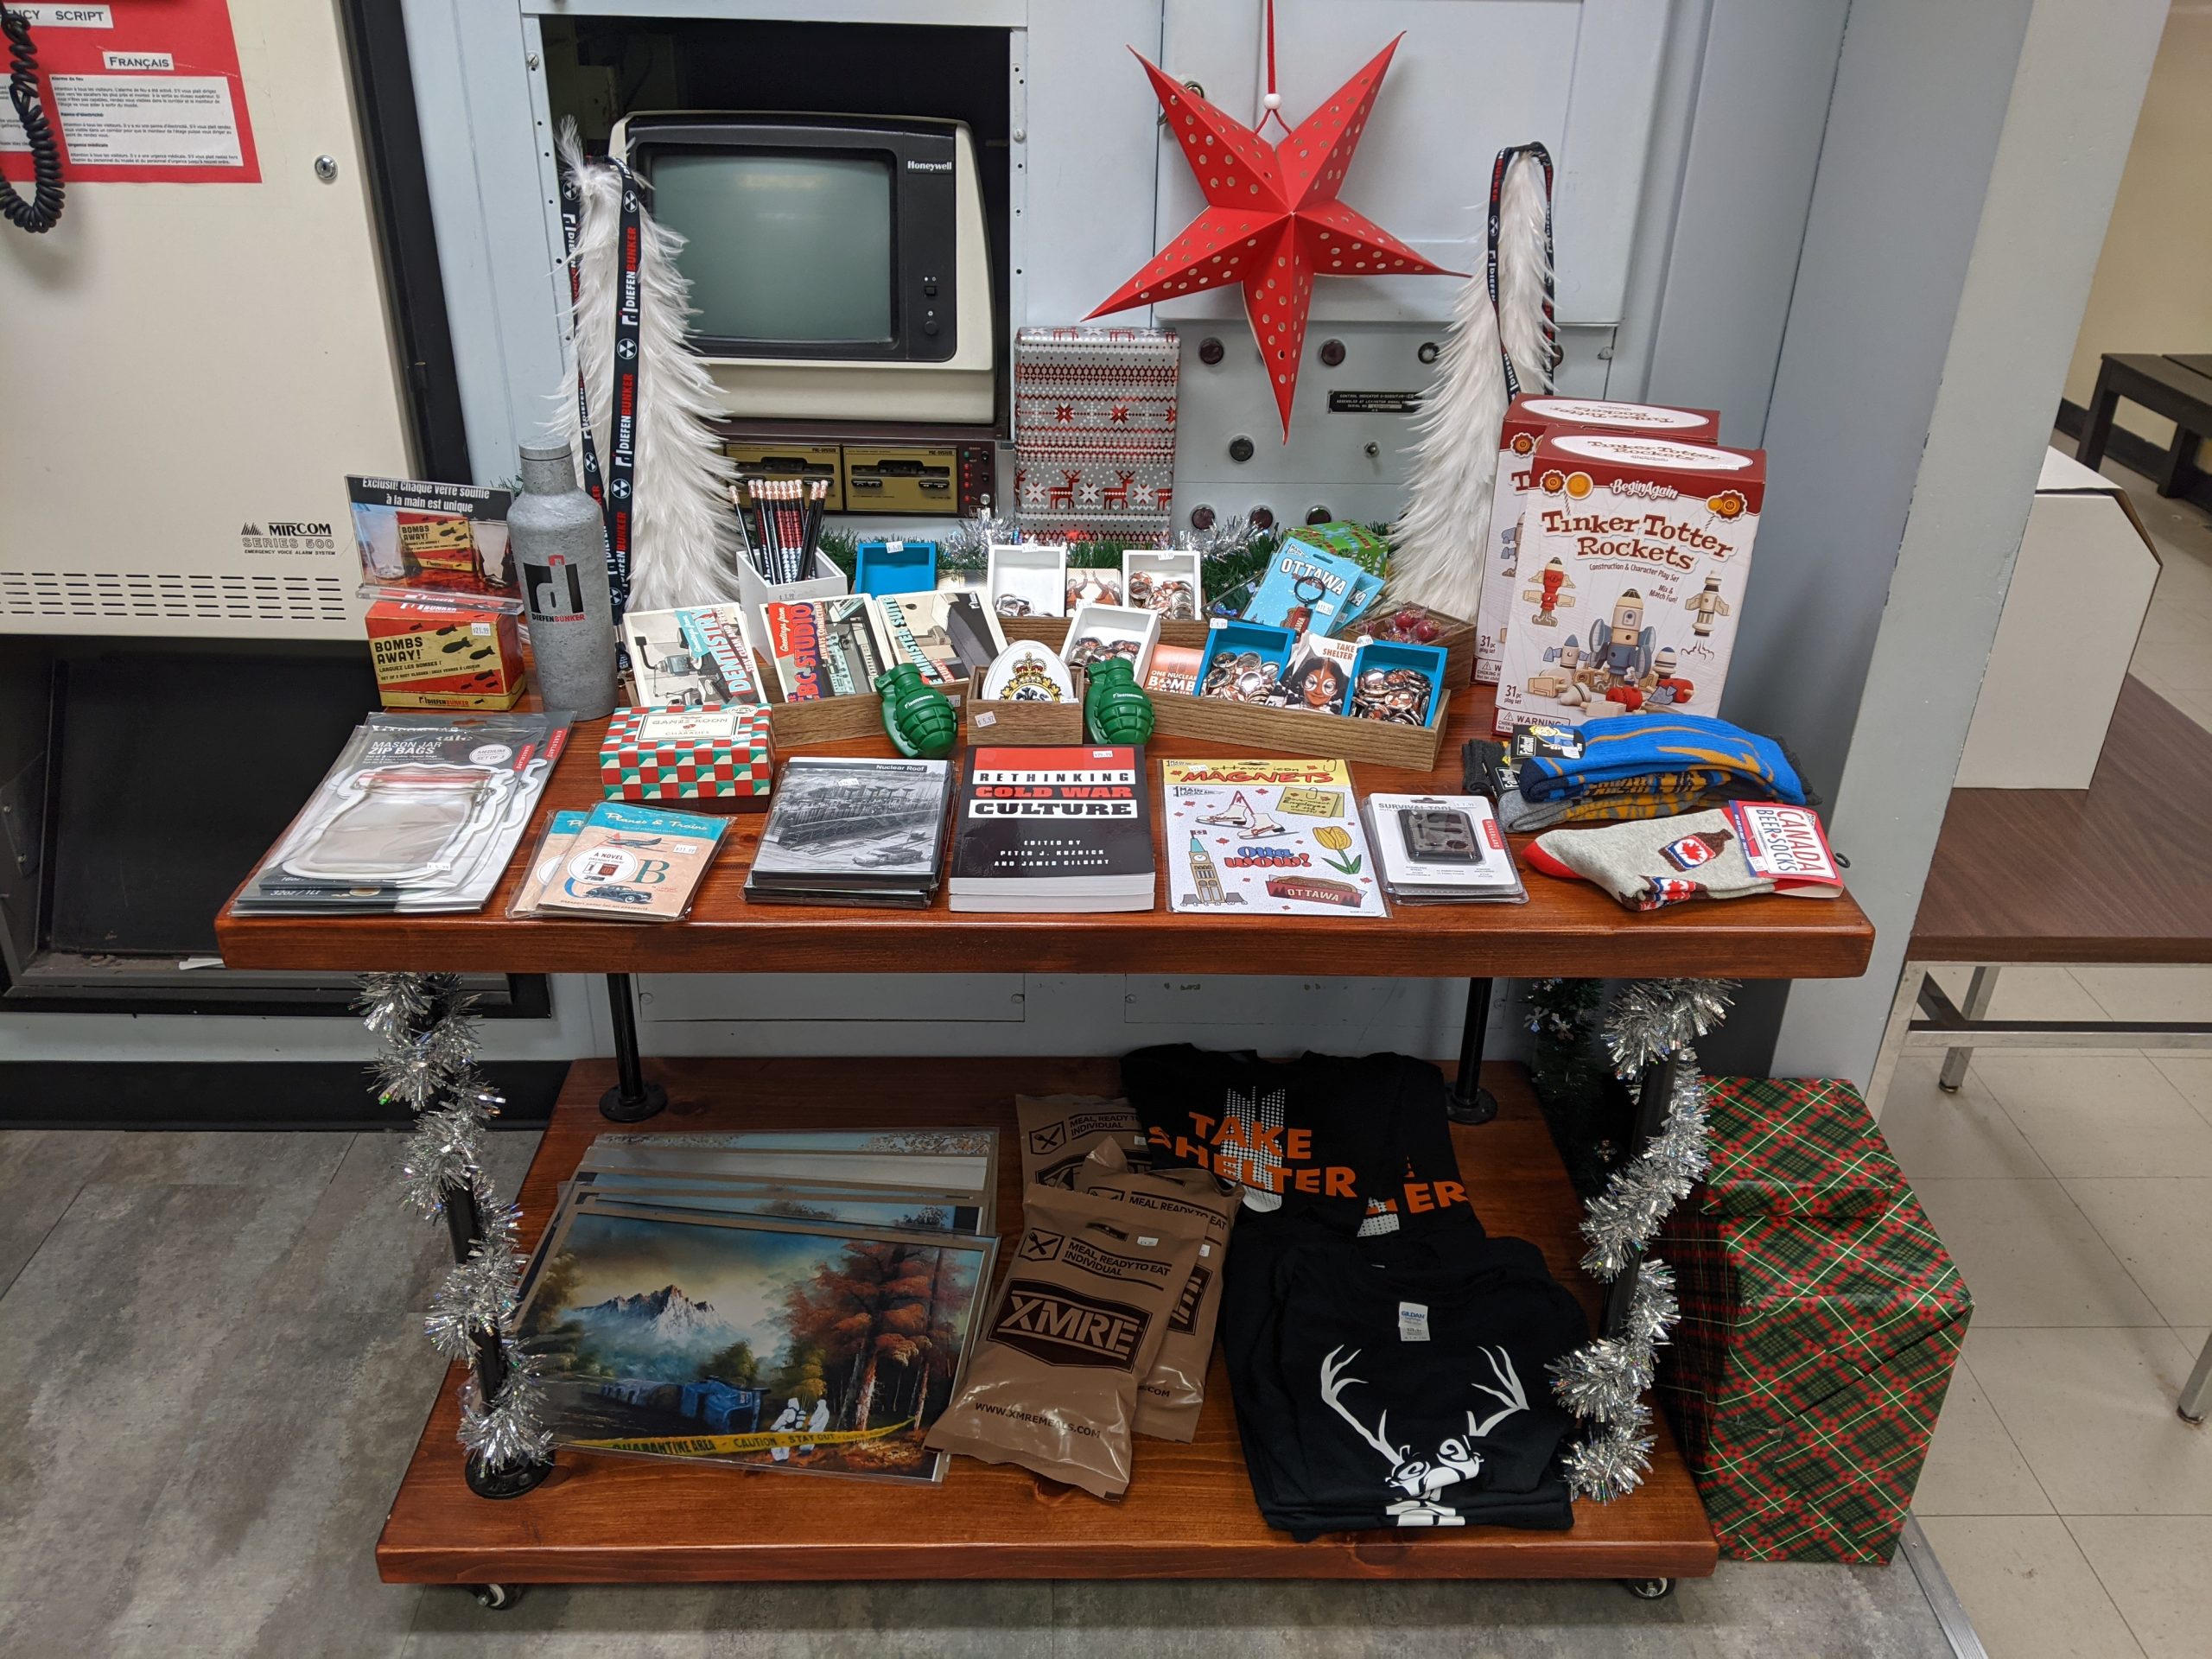 Table at the Diefenbunker with items from the Gift Shop and festive holiday decor